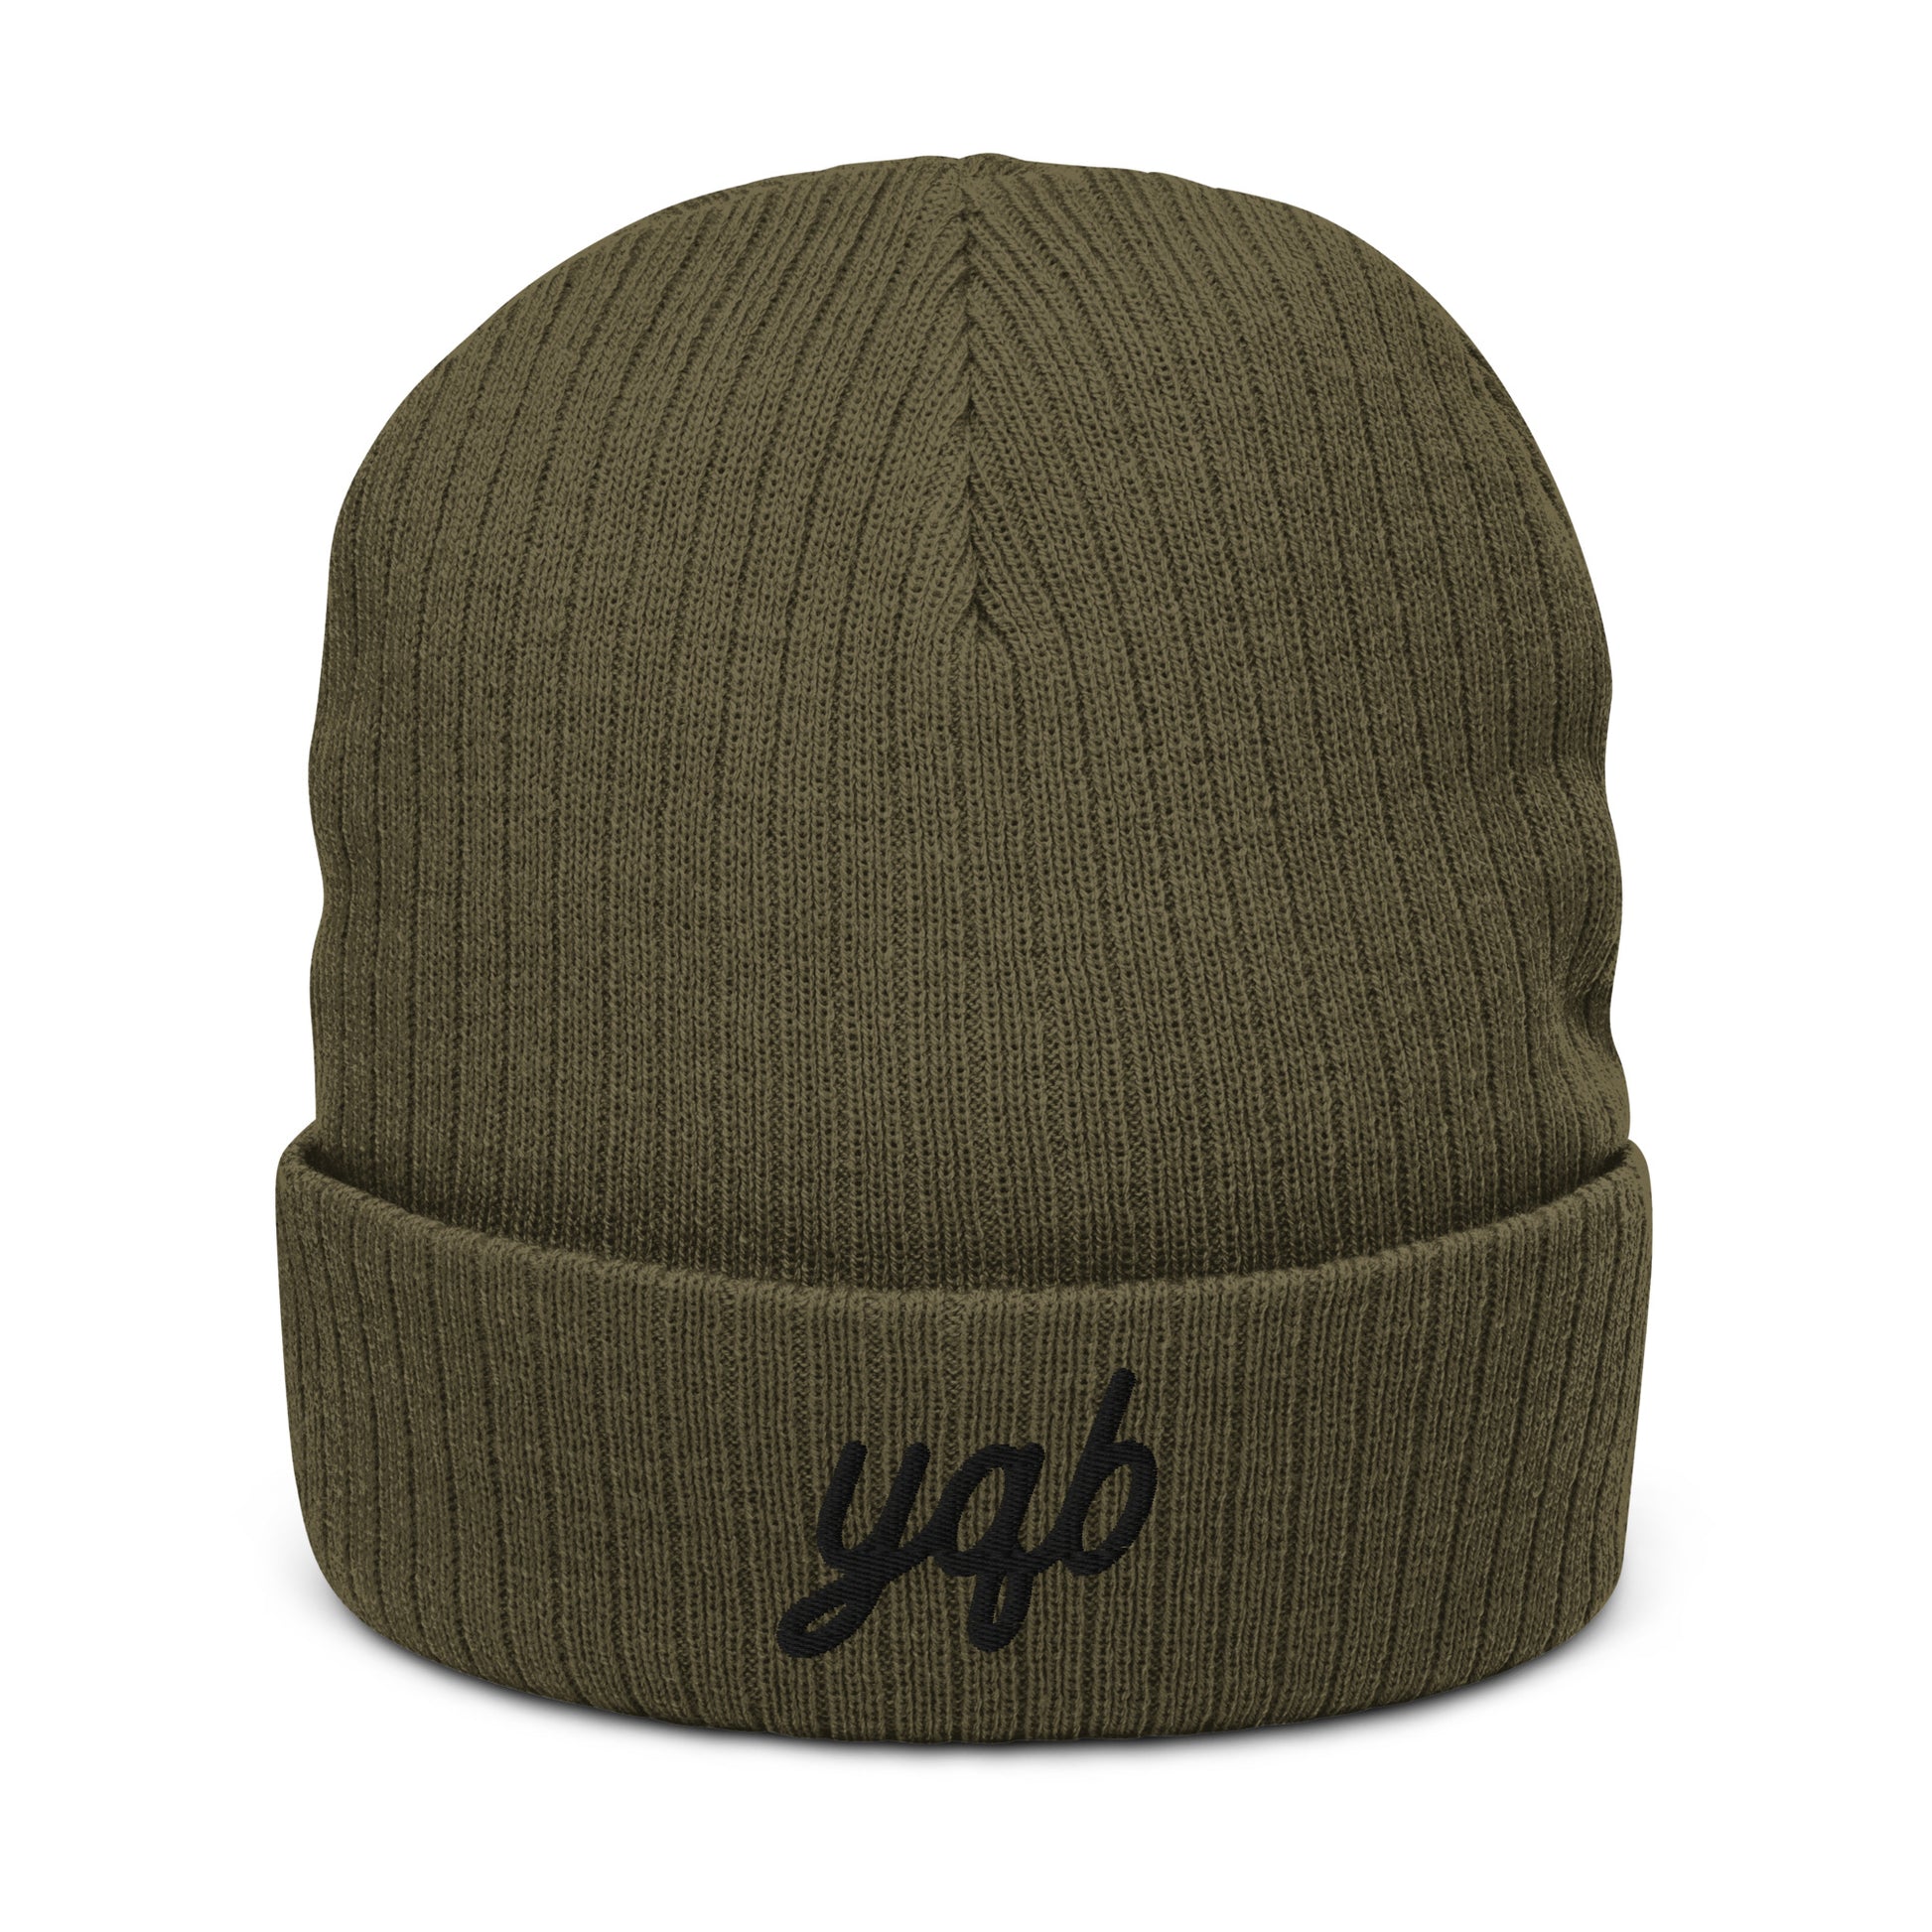 Vintage Script Recycled Cuffed Beanie • YQB Quebec City • YHM Designs - Image 01